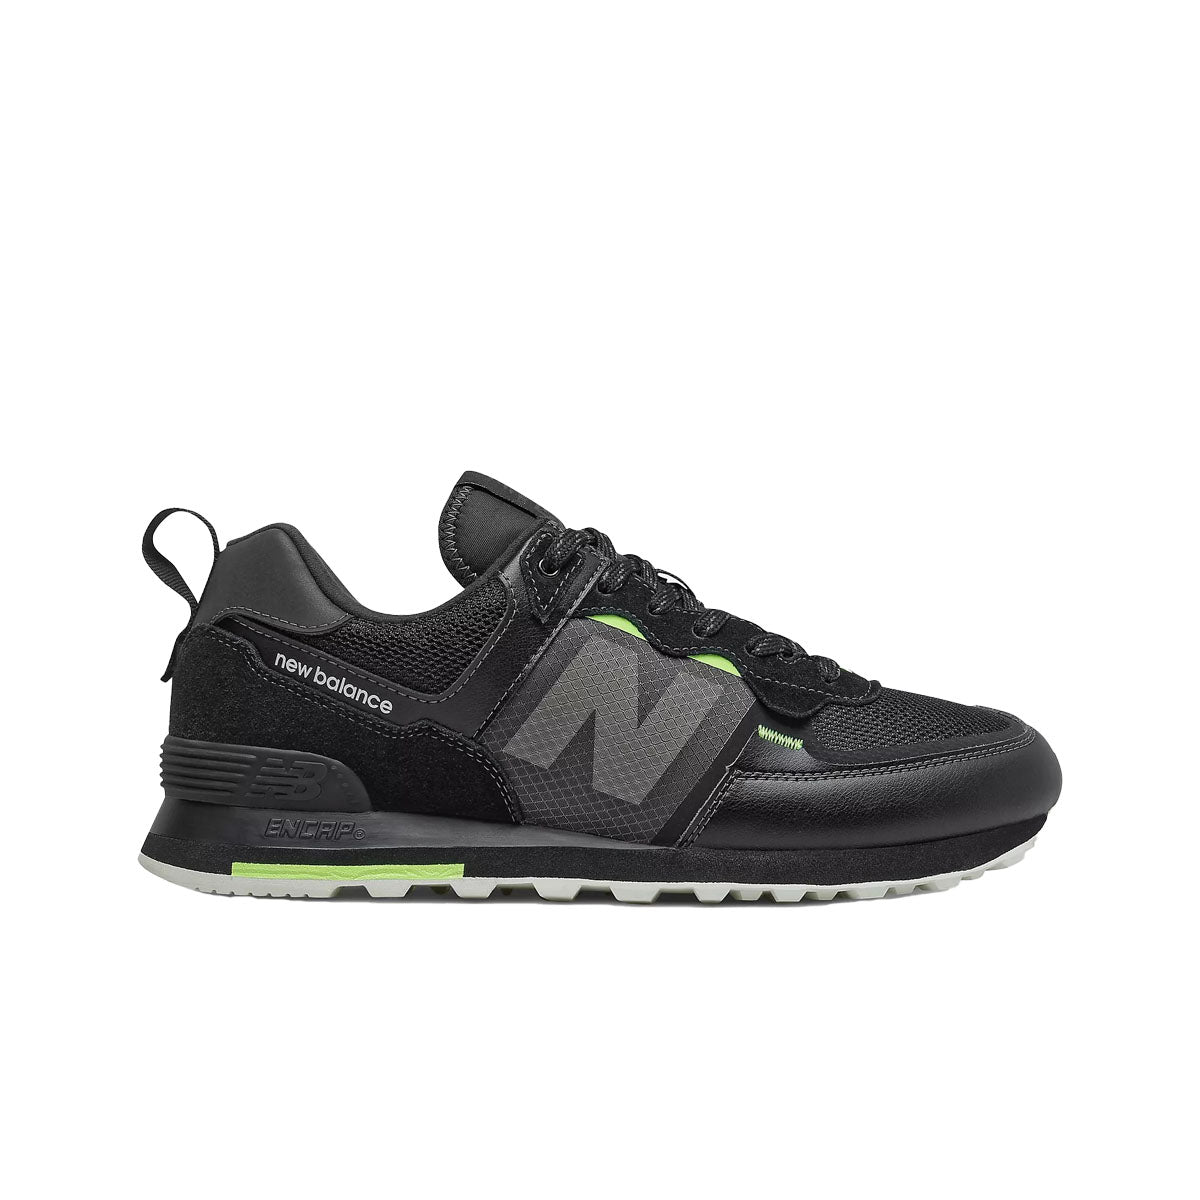 New Balance Mens 574 Casual Sneakers ML574IDC Black/Bleached Lime Glo